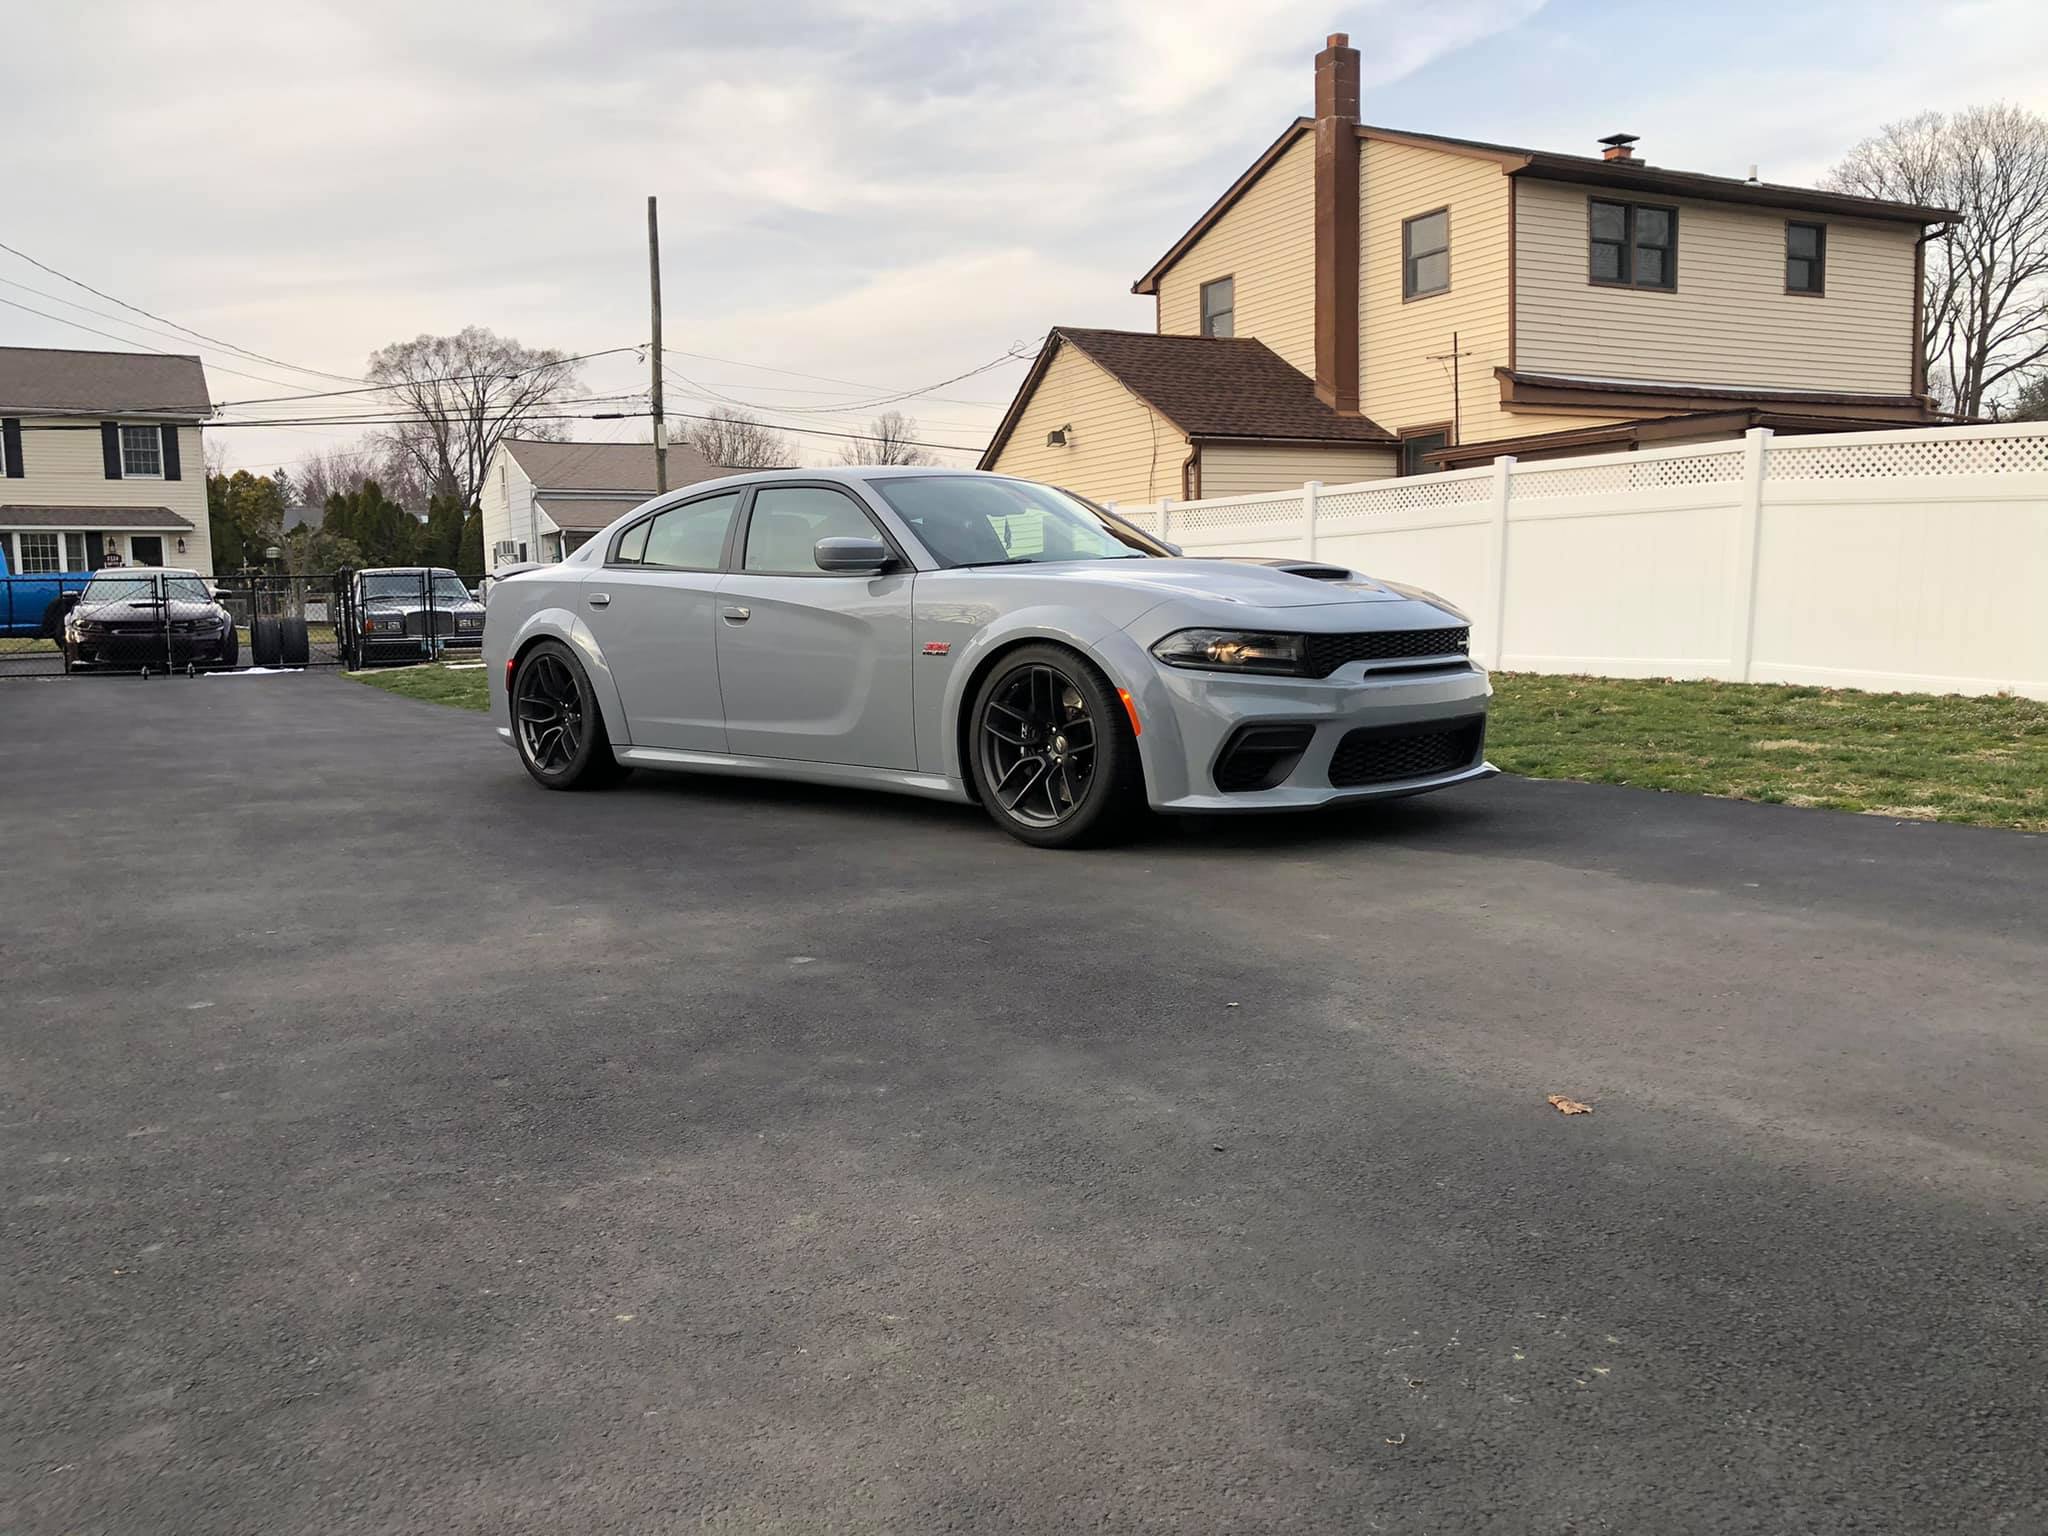 Eibach Pro-Kit Lowering Springs 11-23 Charger/Challenger/300 Hellcat Scatpack & Widebody